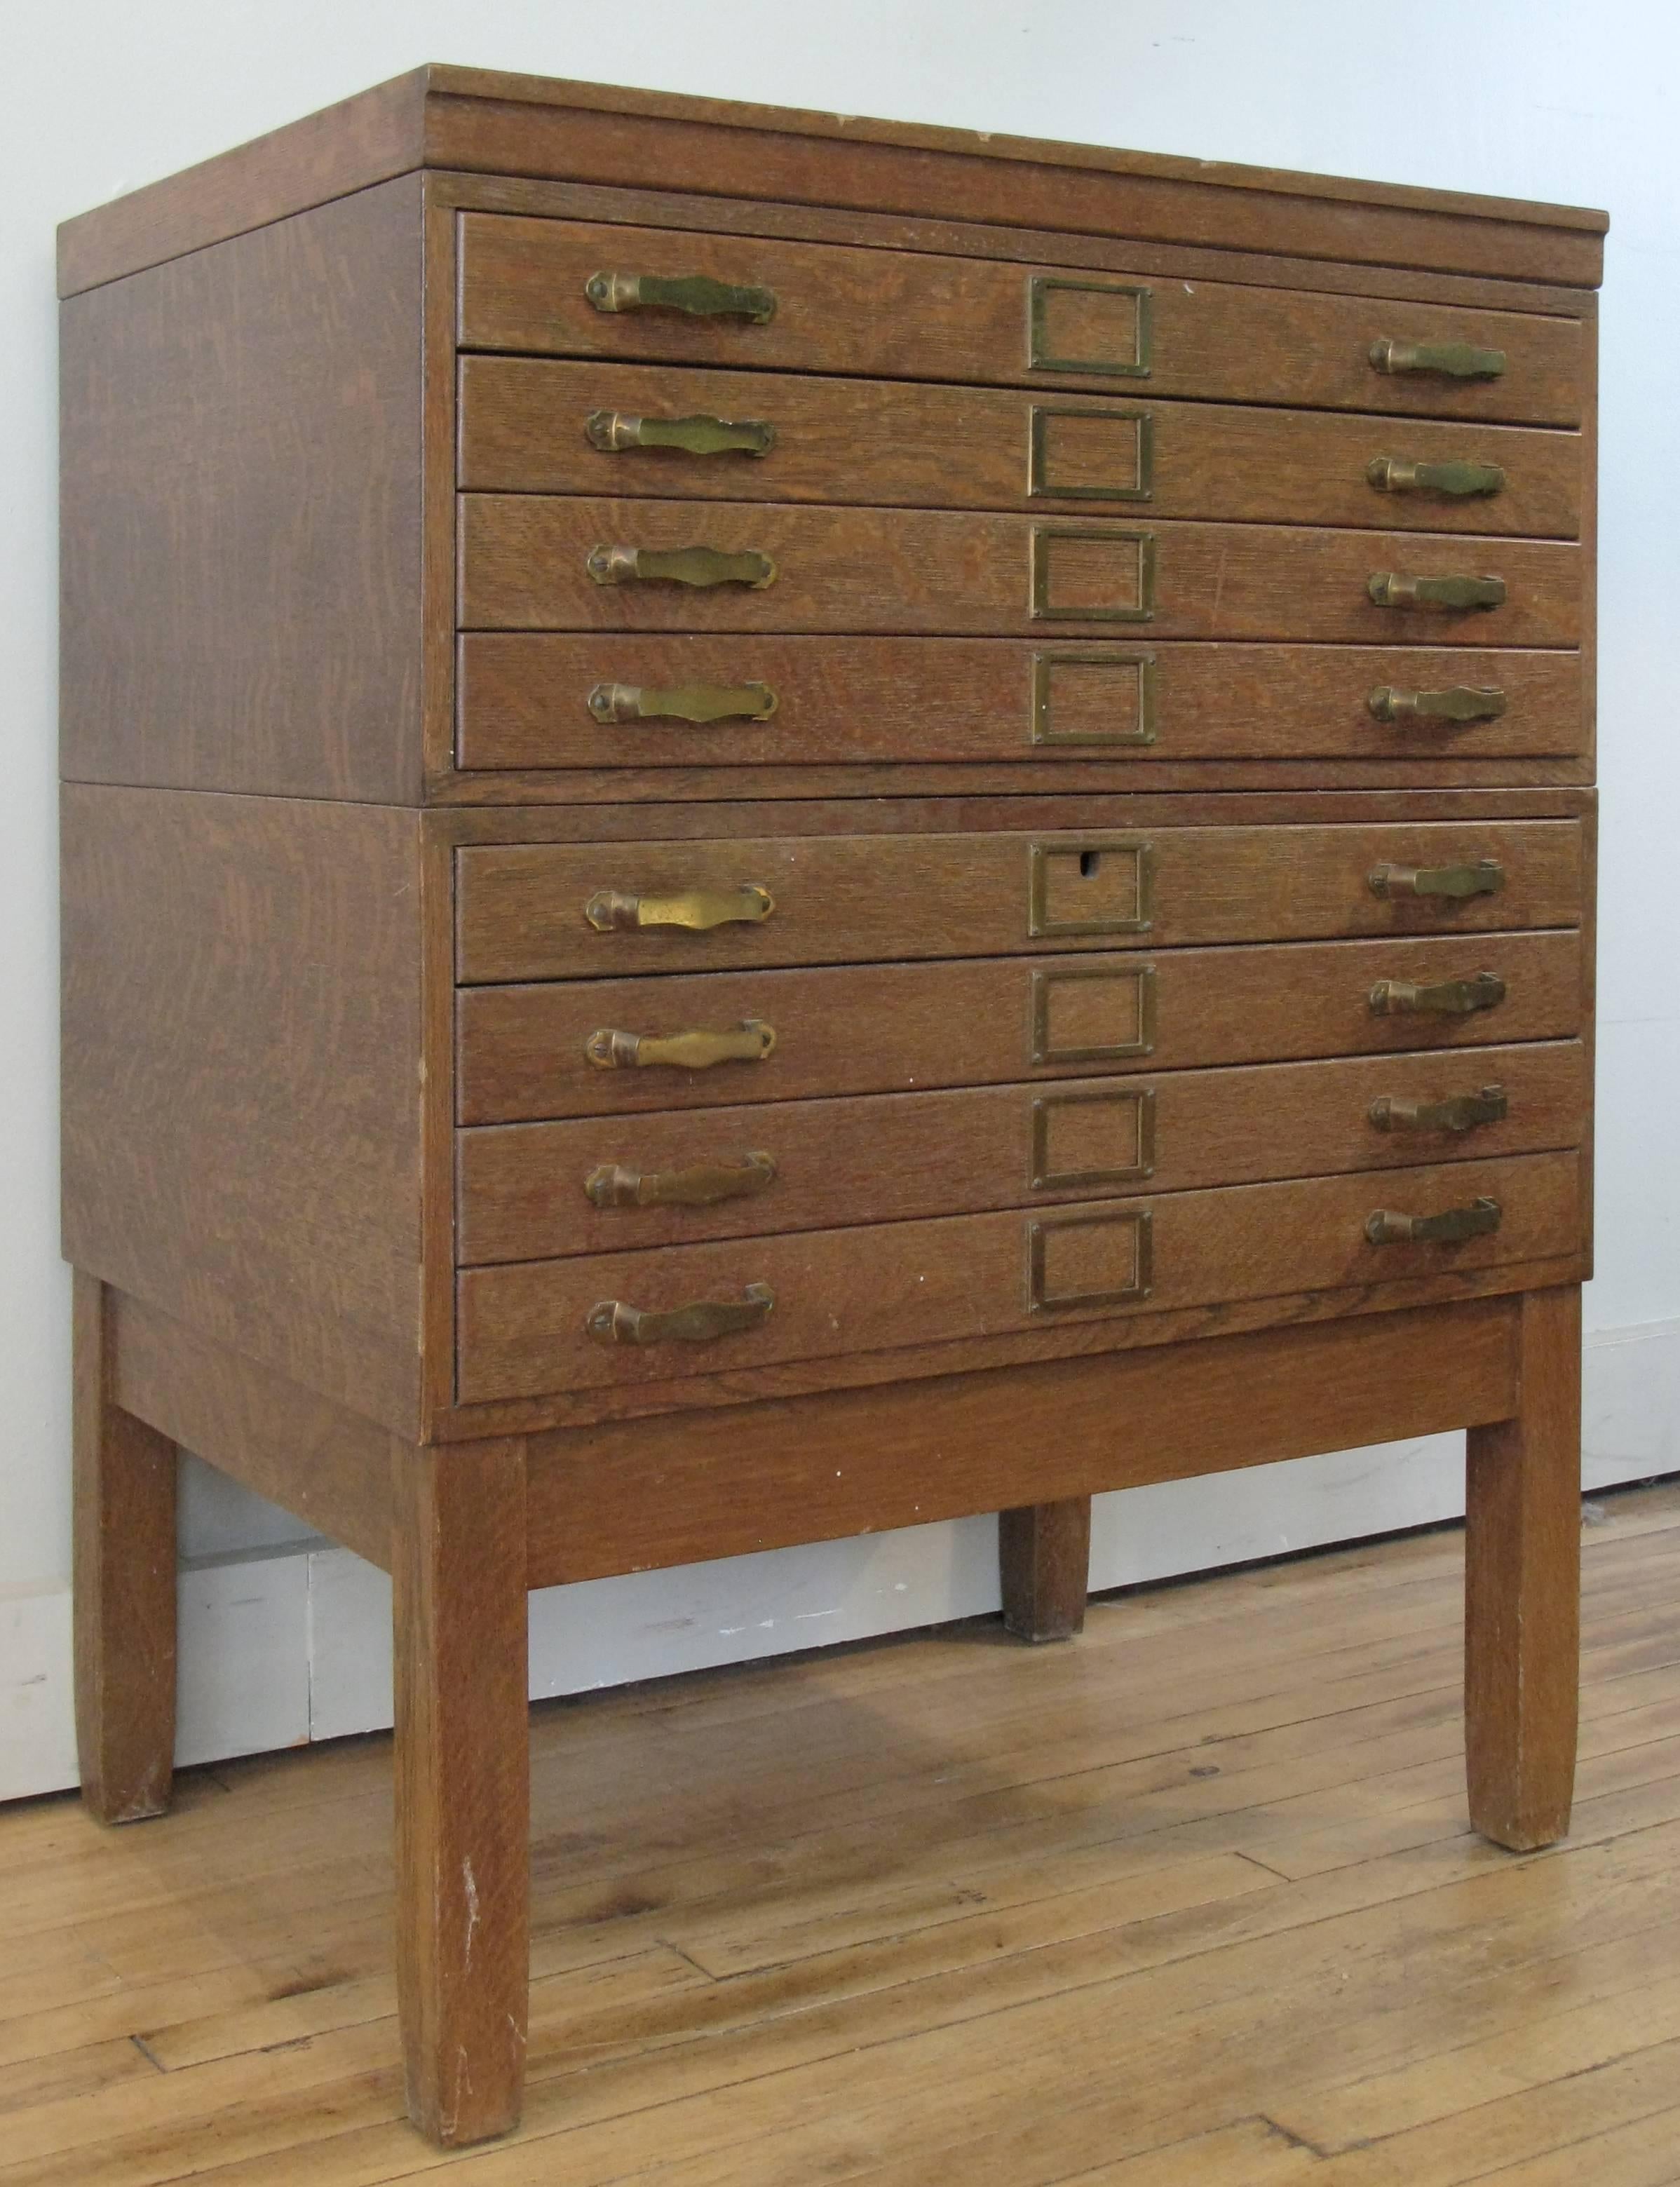 A very handsome antique 1940s oak architects flat file or map case, raised on square legs, the two part case has eight full width drawers with interior brass retaining bars for keeping the contents of the drawer from catching on the drawer frame.